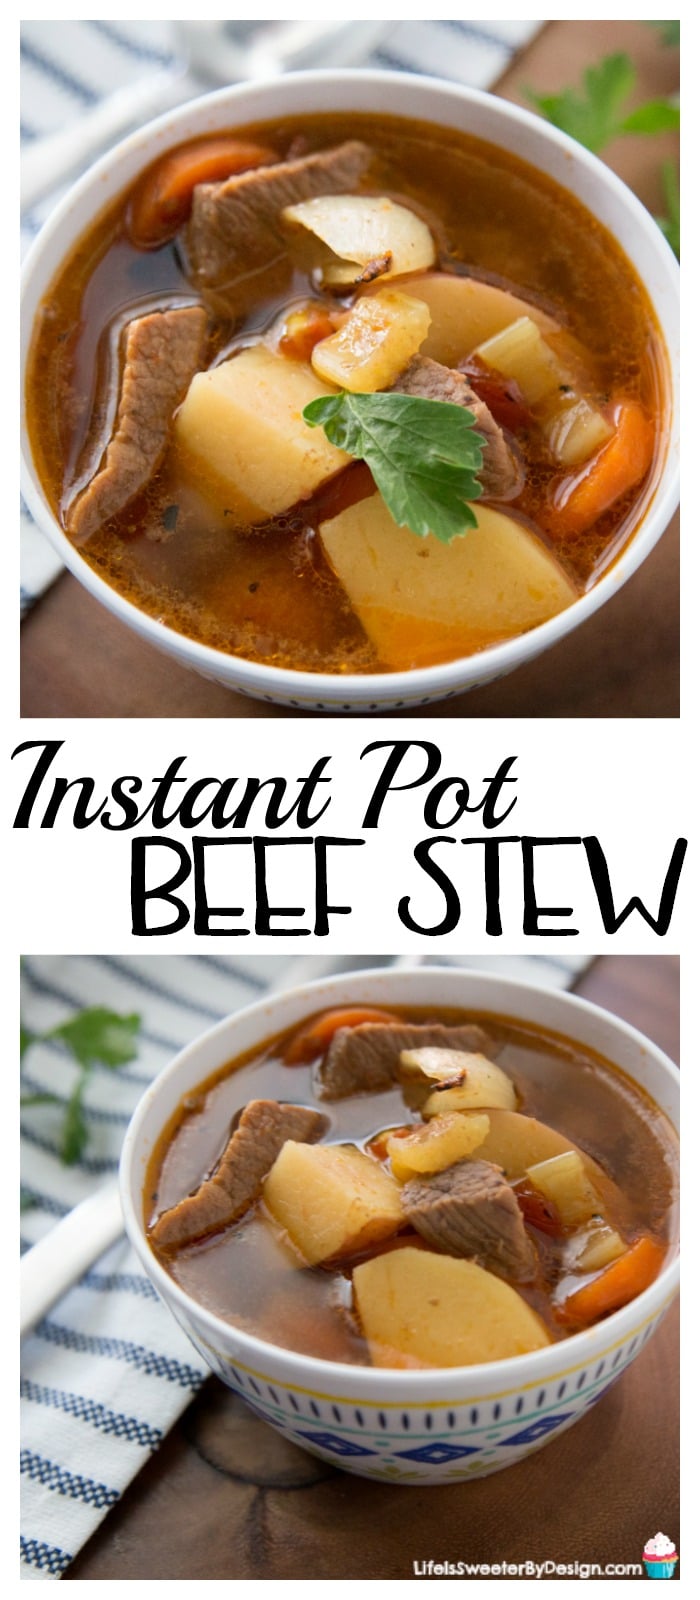 Instant Pot Beef Stew is hearty and delicious. This Weight Watchers recipe only has 3 Freestyle SmartPoints per serving too! Instant Pot soup recipes are so quick and easy to make!